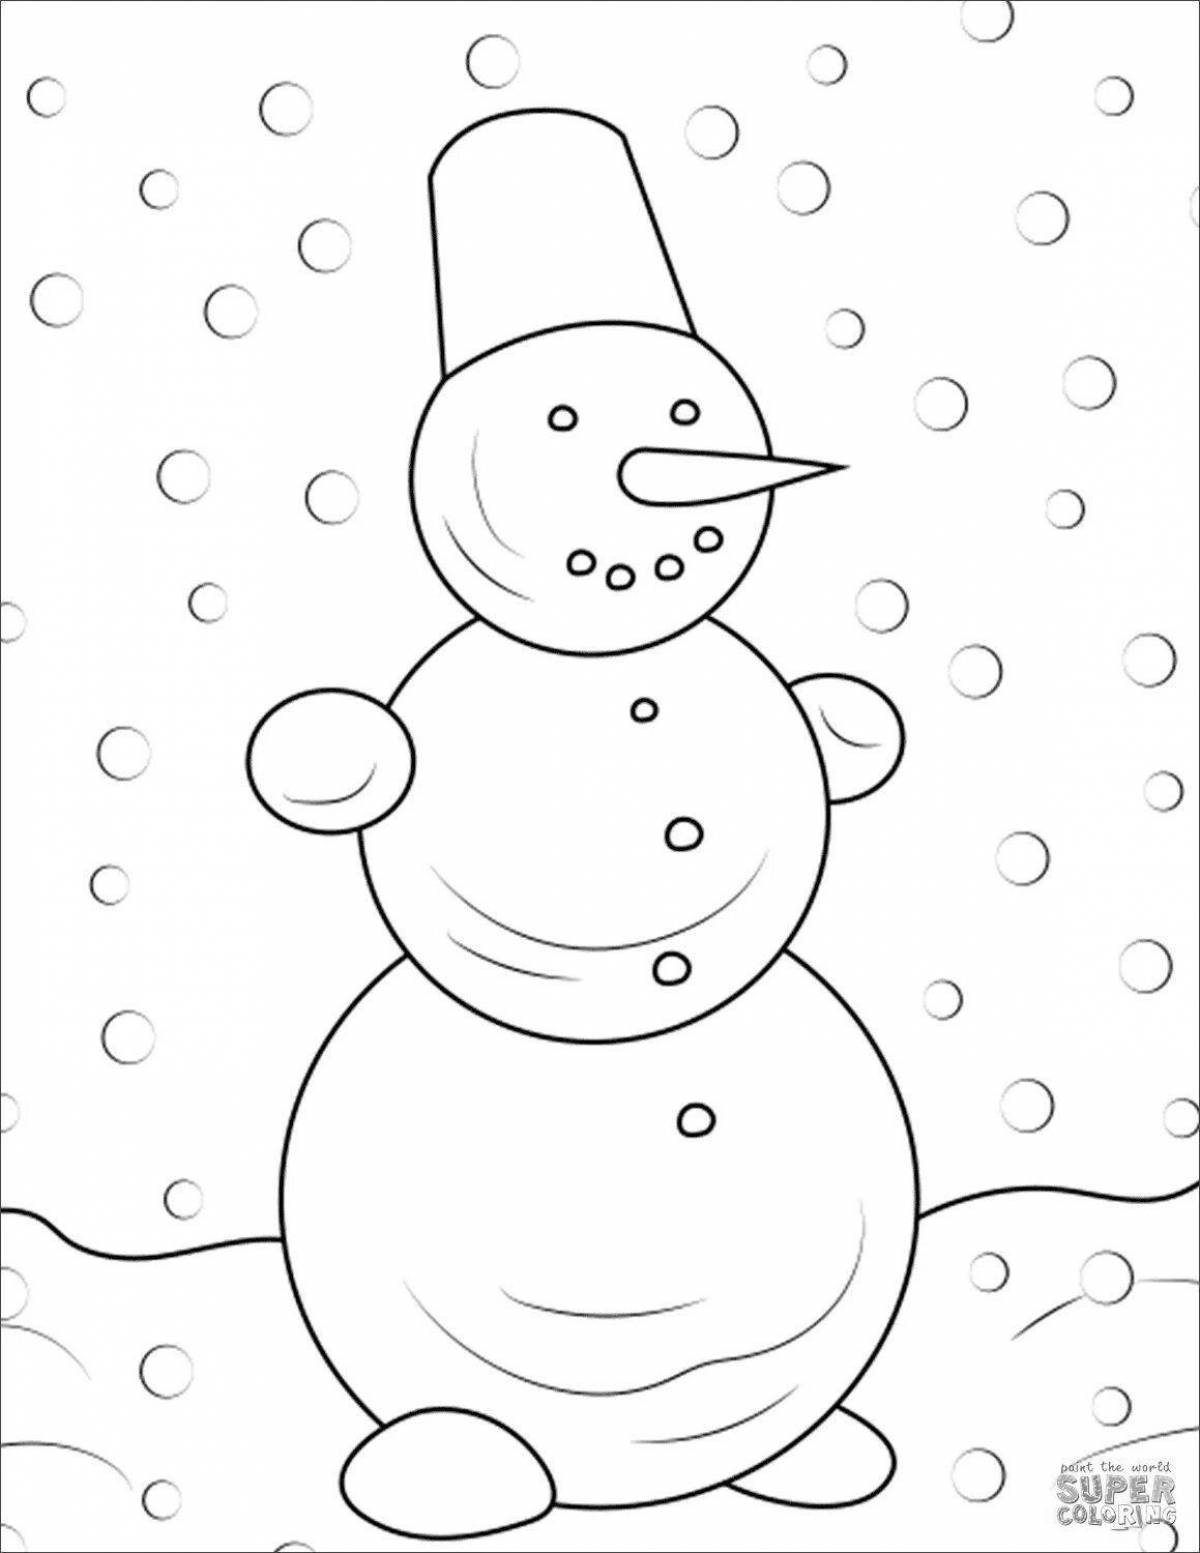 Playful junior group winter coloring